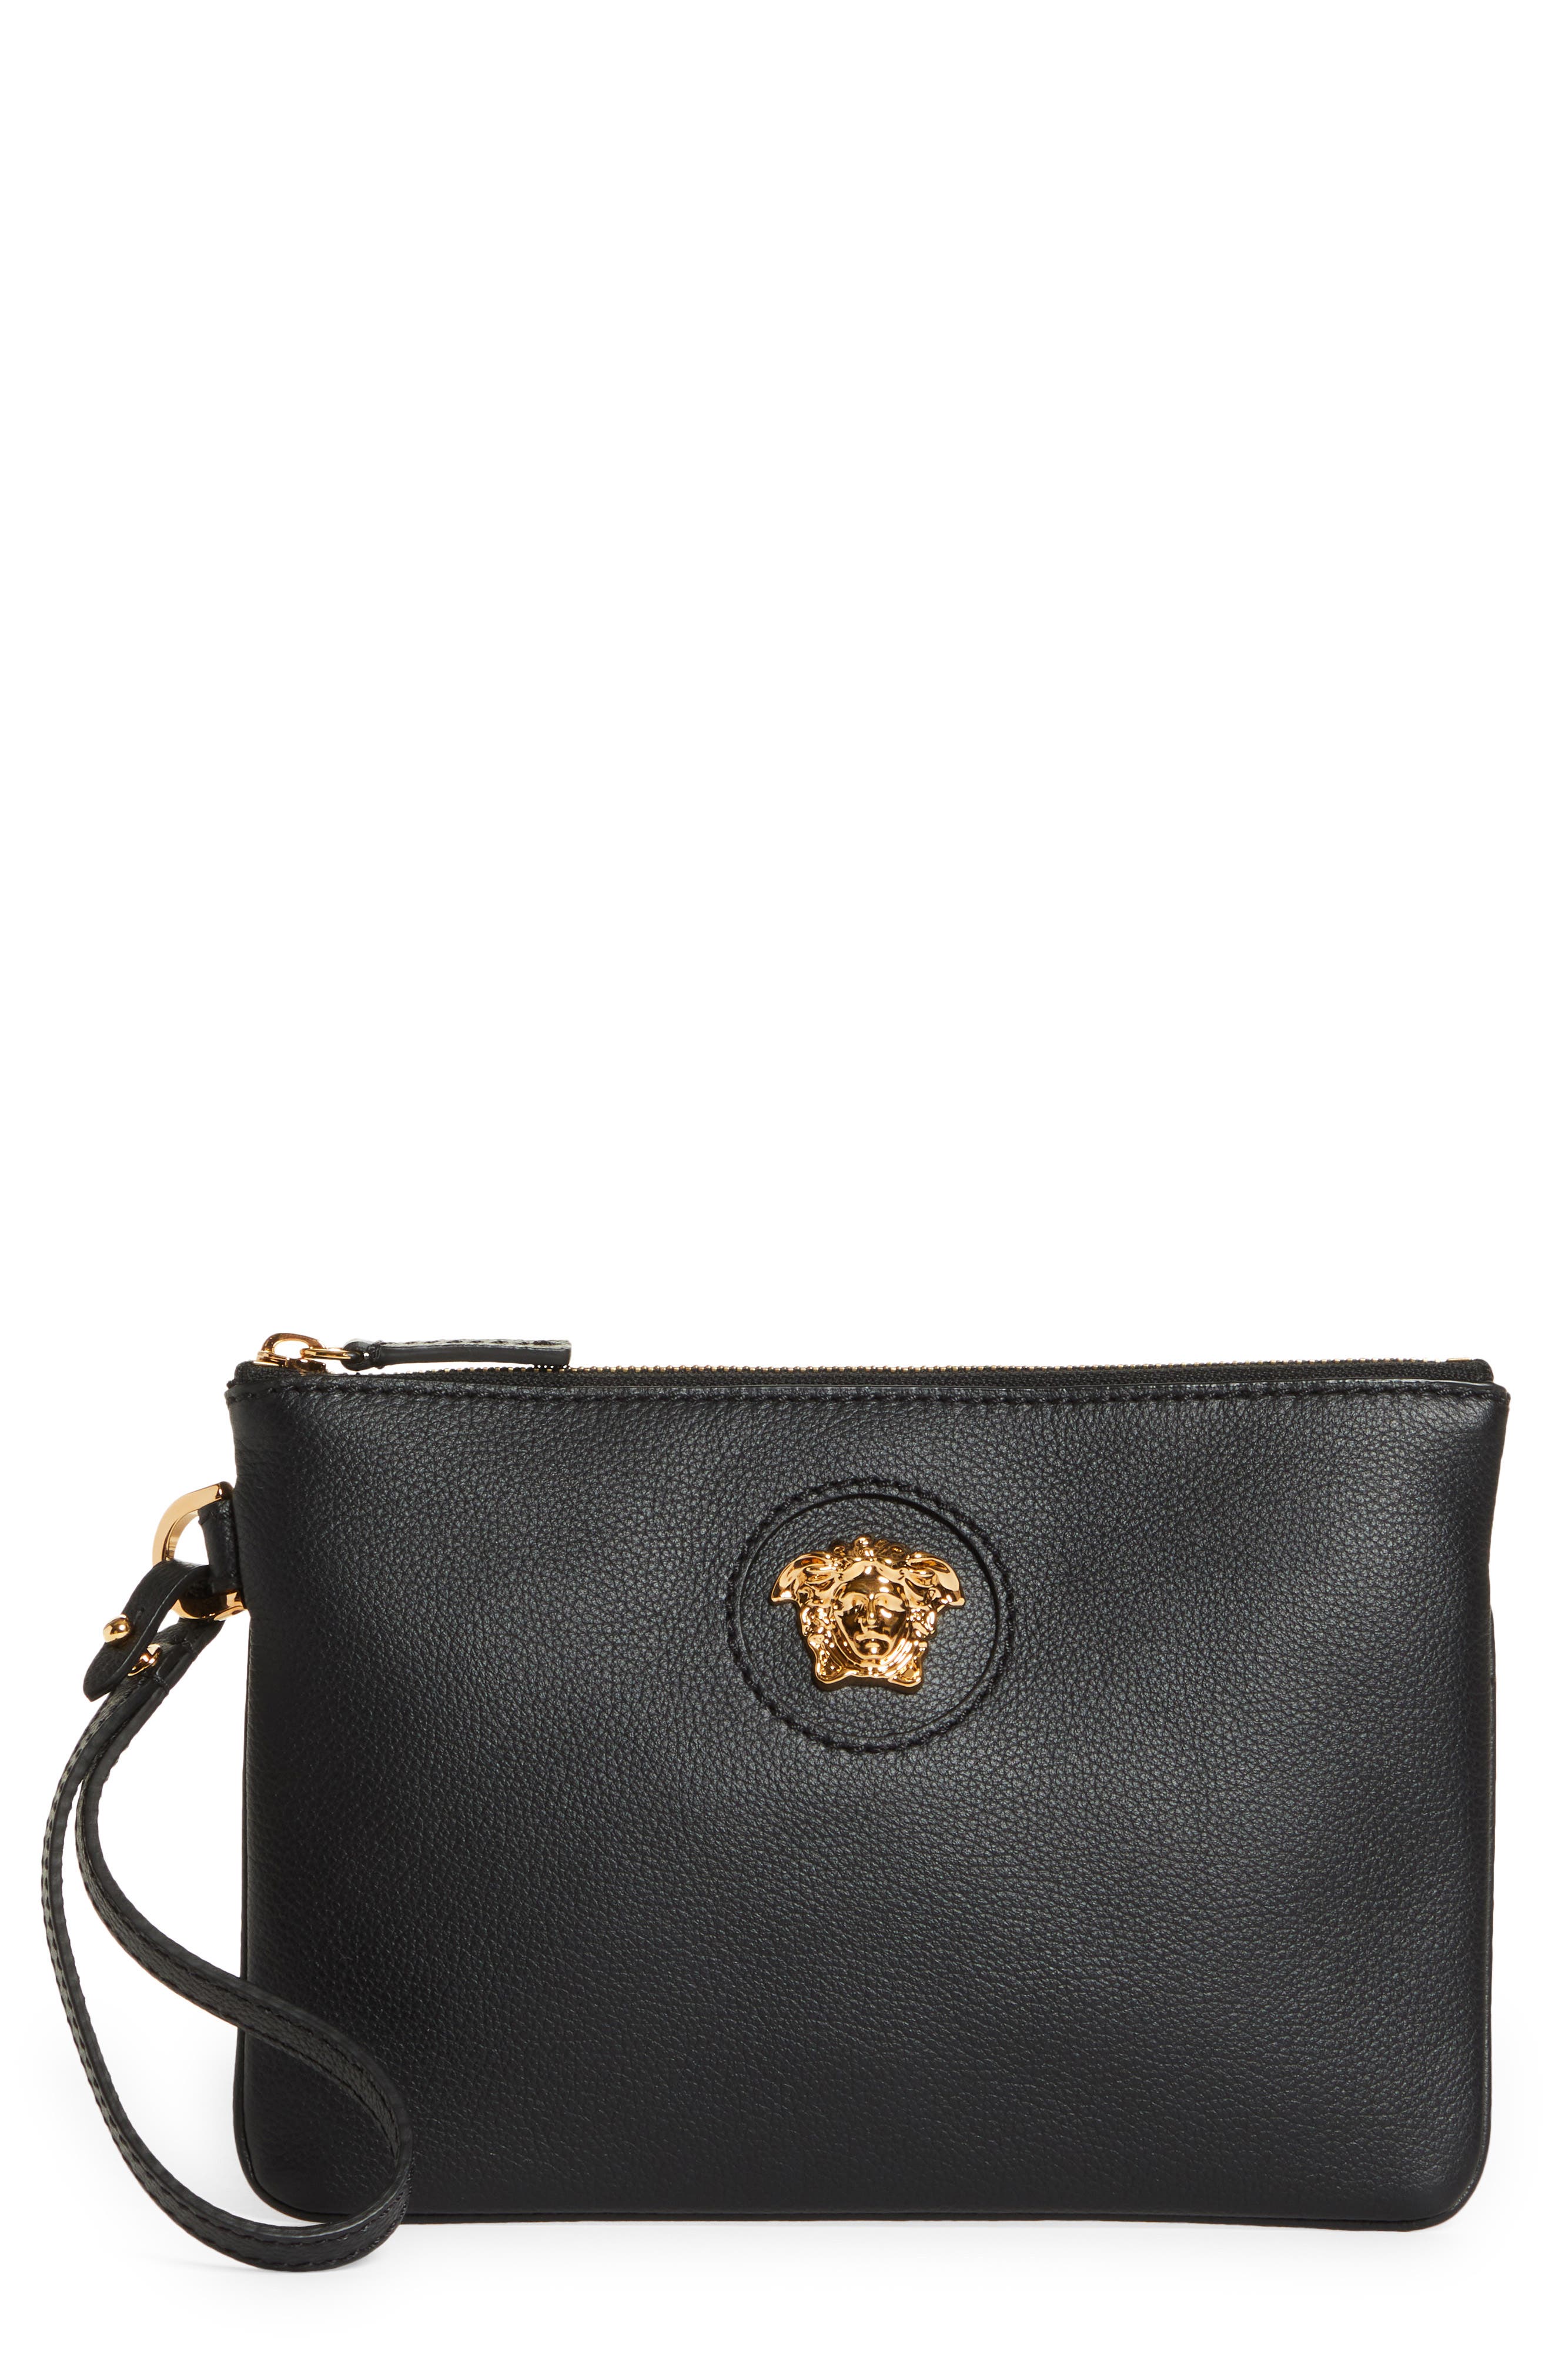 Versace La Medusa Zip Leather Pouch in Black-Versace Gold at Nordstrom